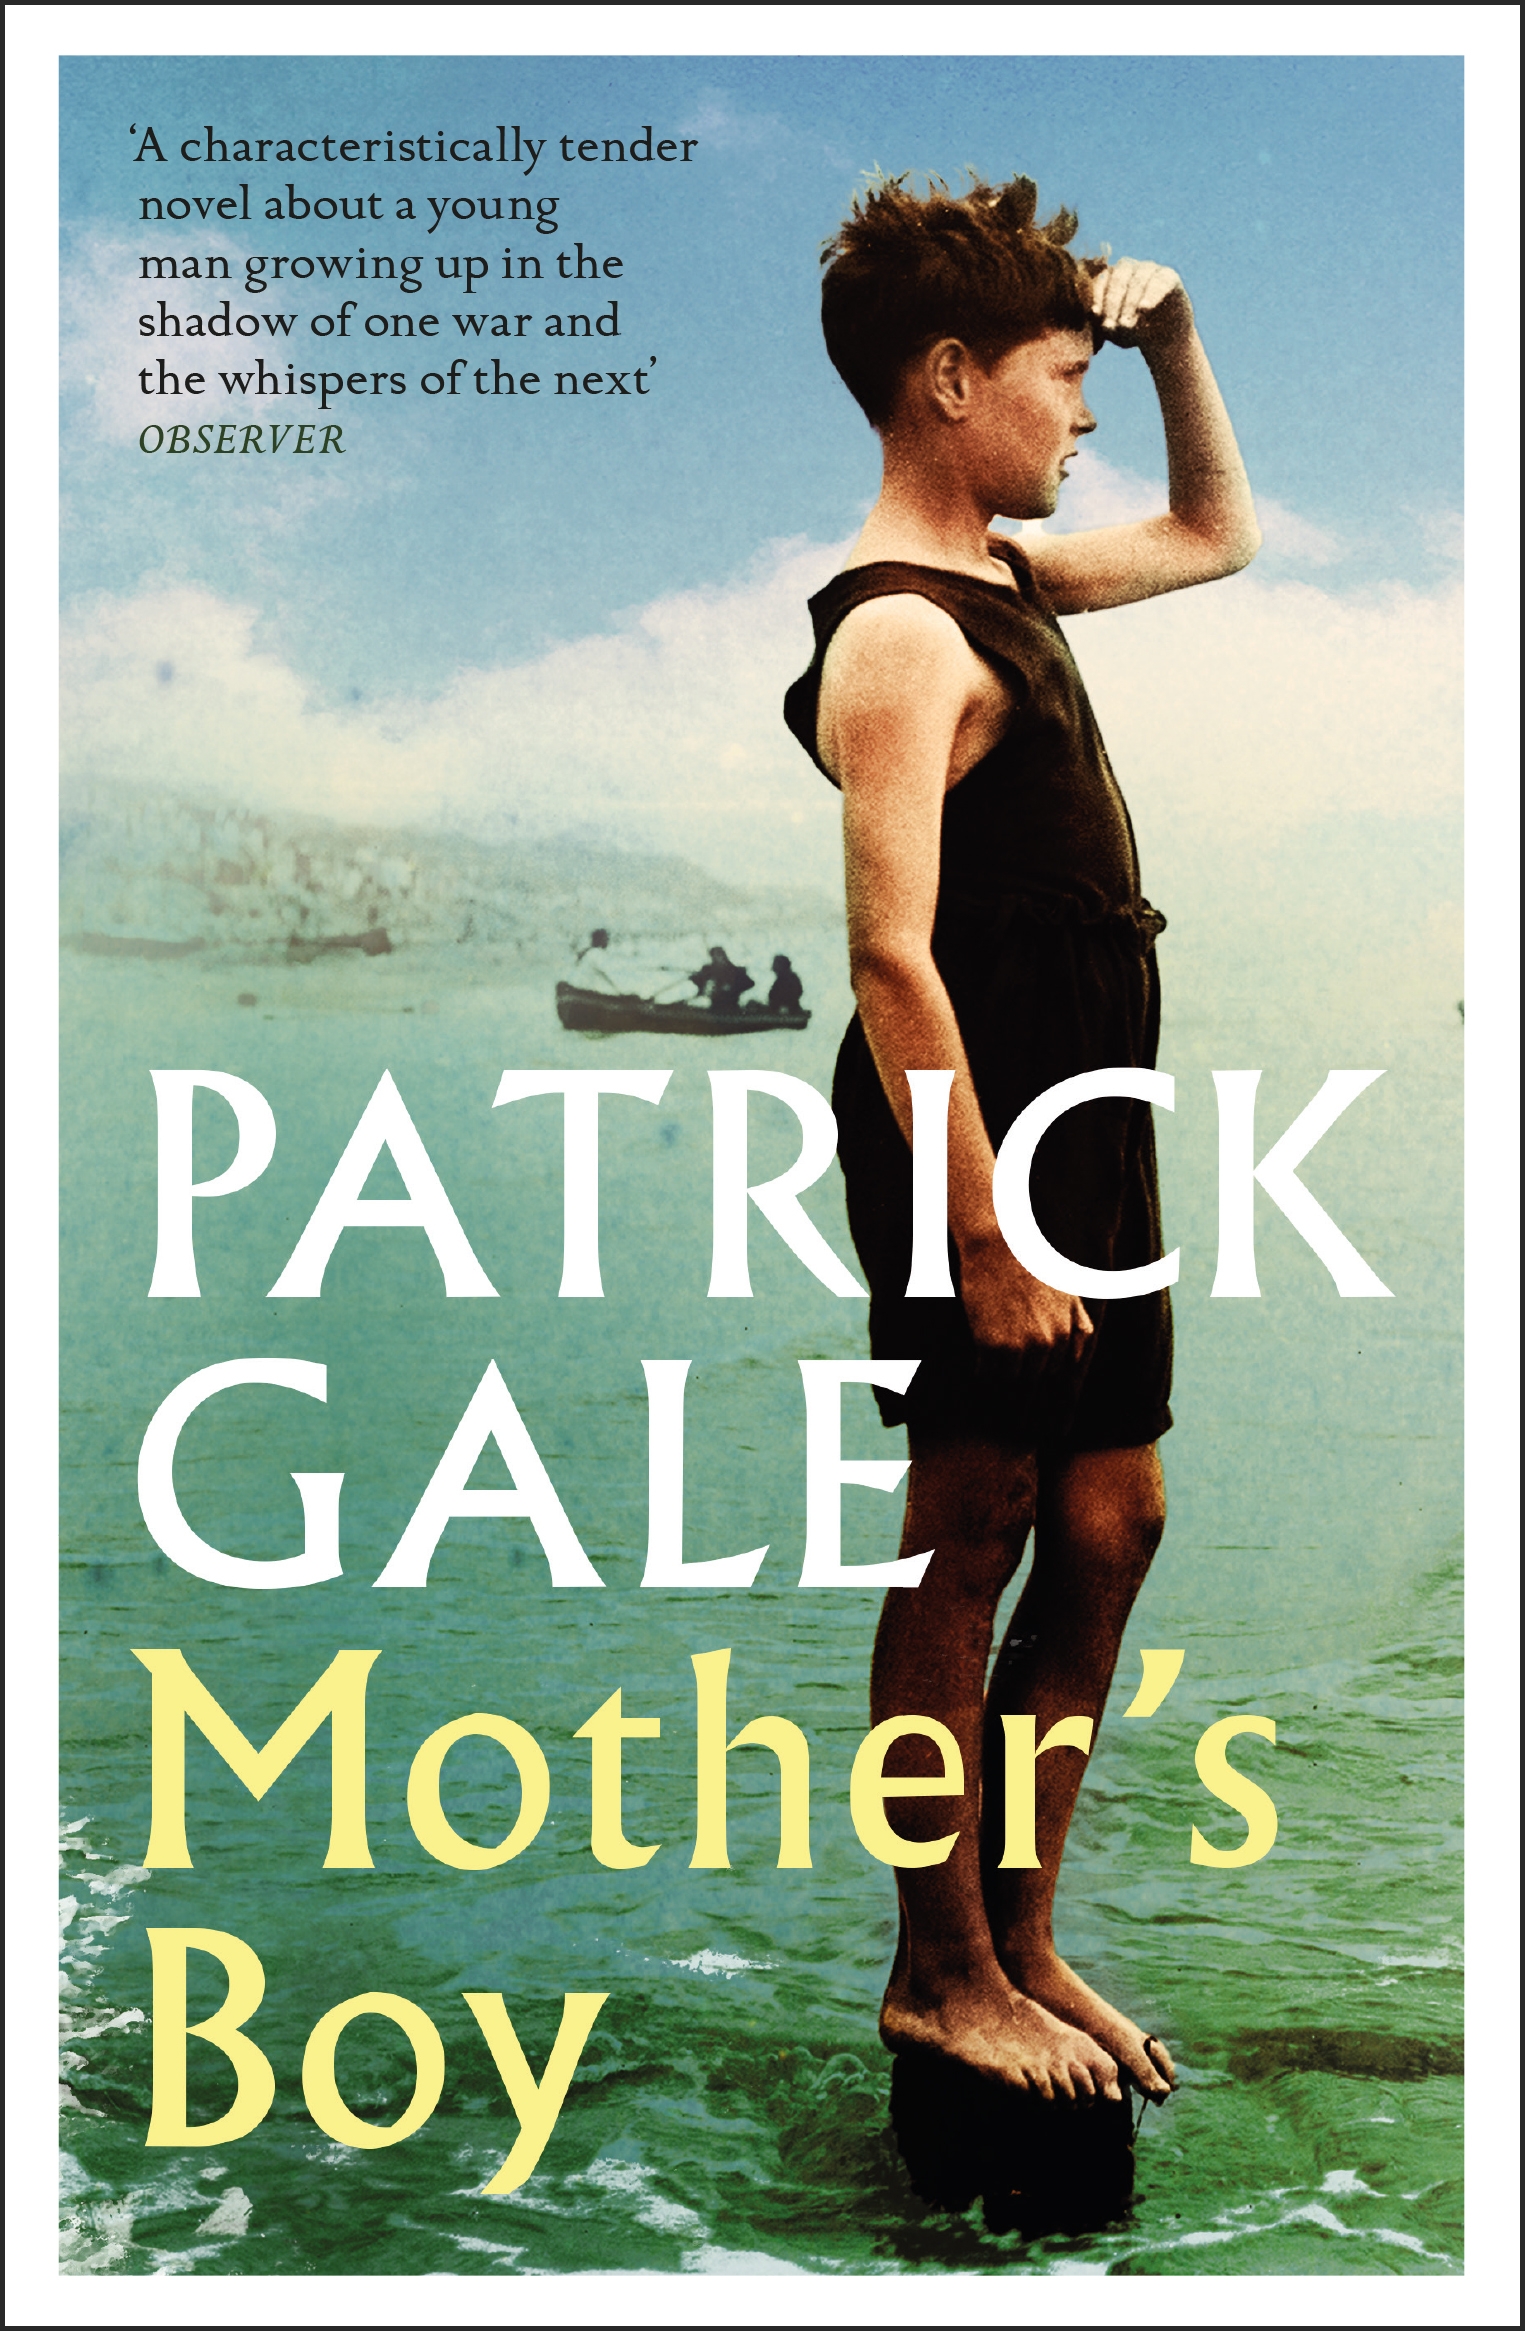 Patrick will discuss his new book Mother's Boy